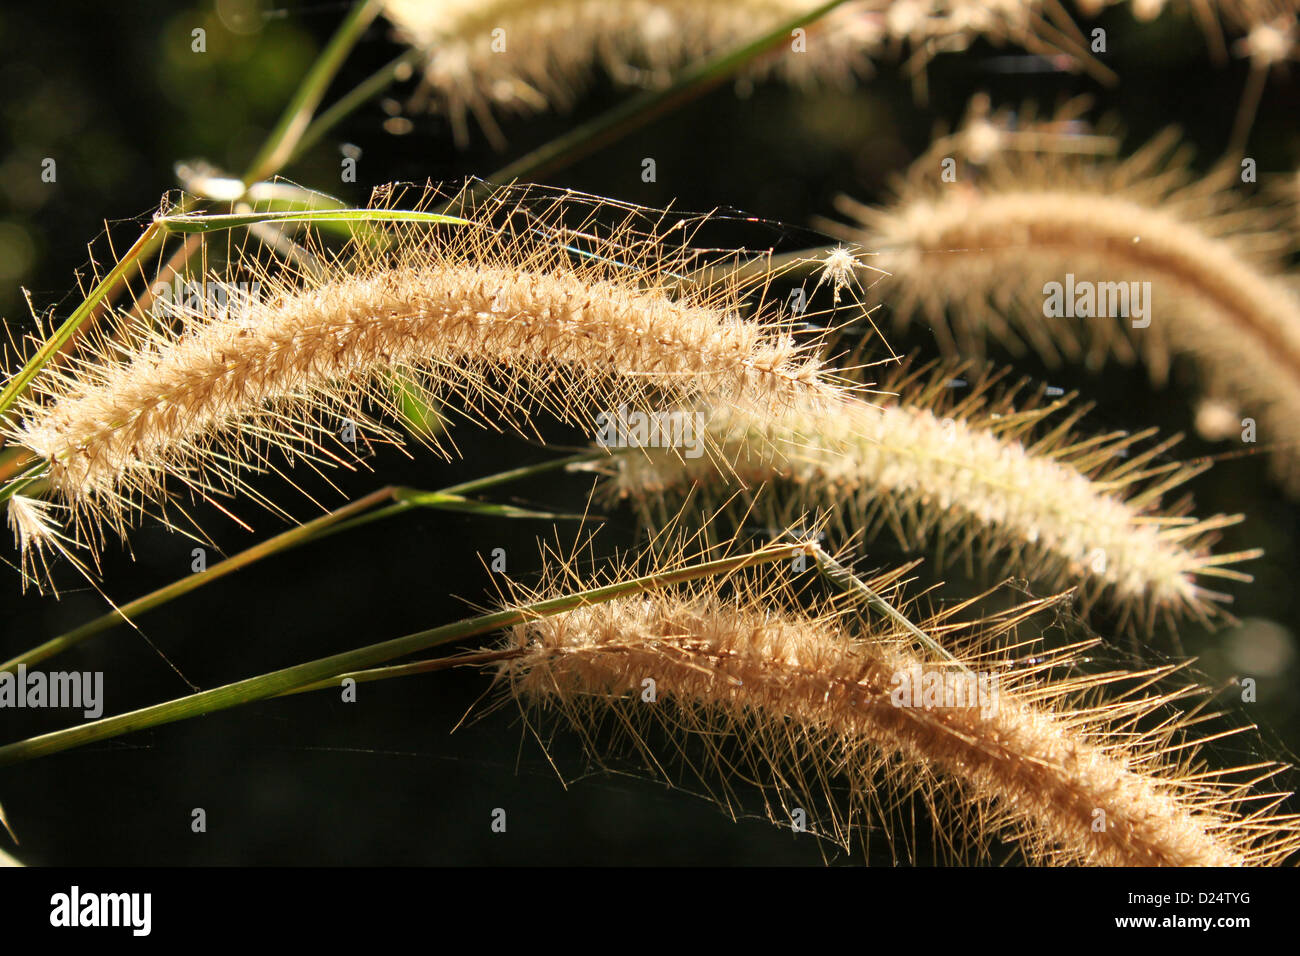 Giant Swamp Foxtail grass with golden bristles India Stock Photo